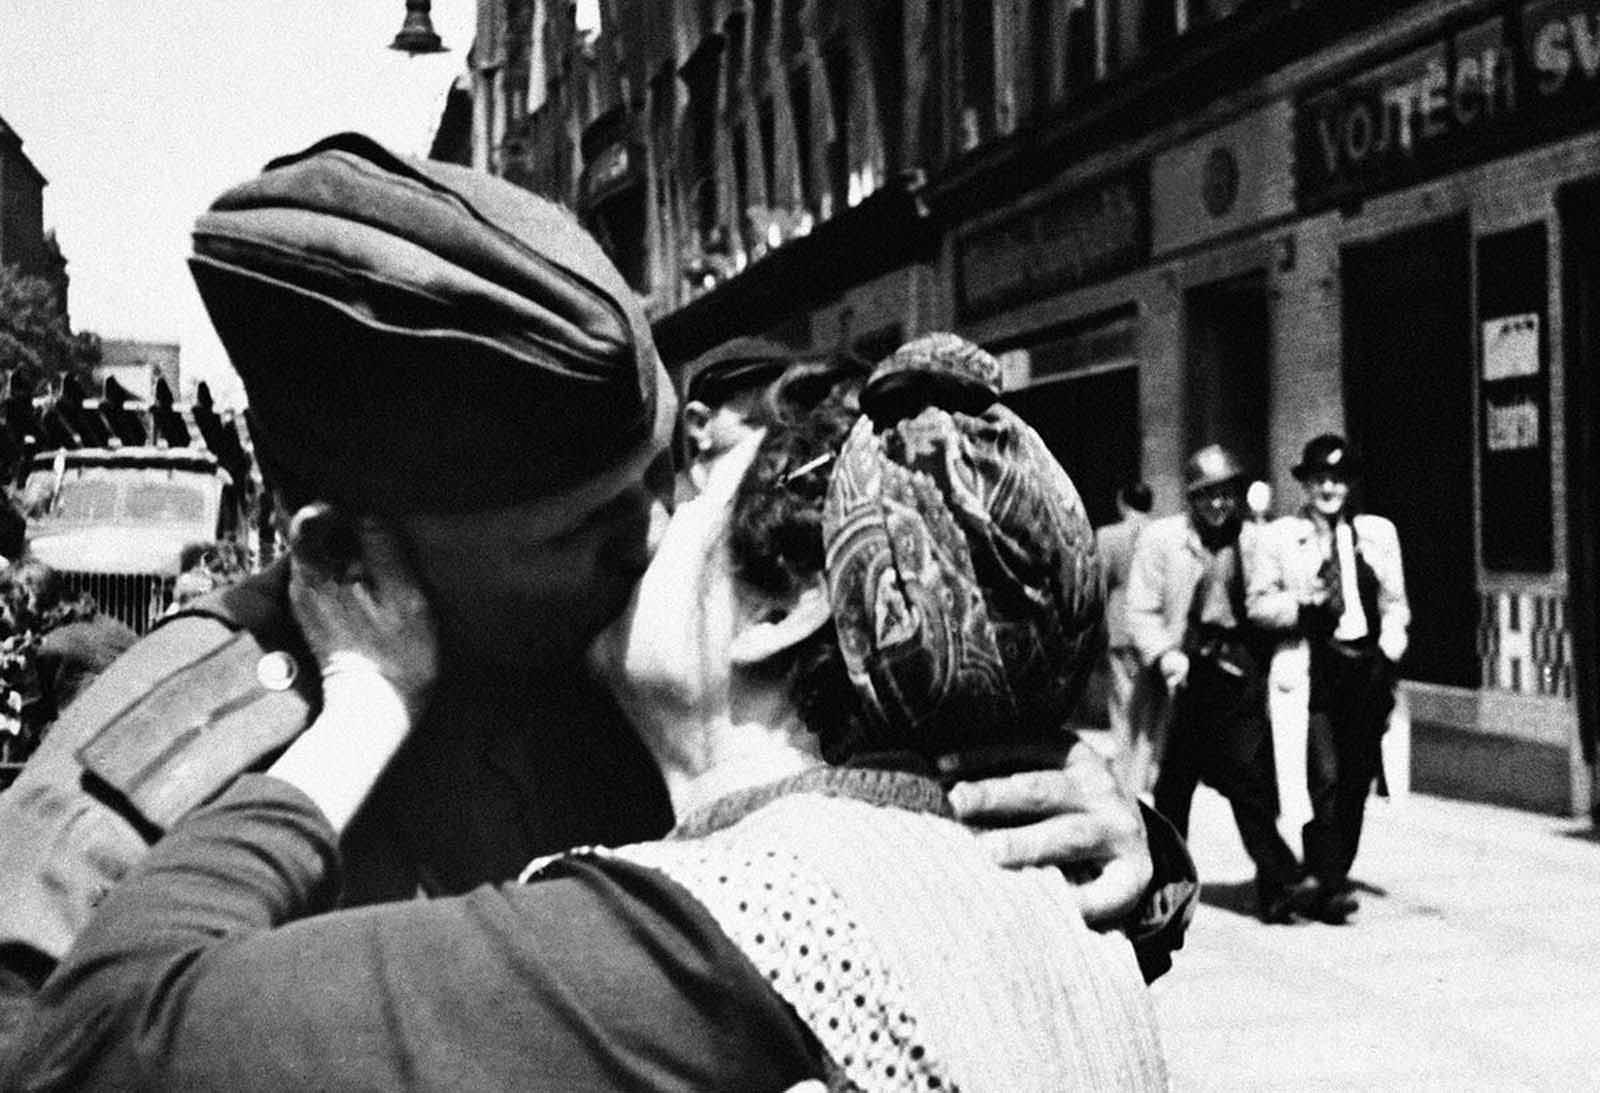 40 pictures from the Last days of Germany in WWII